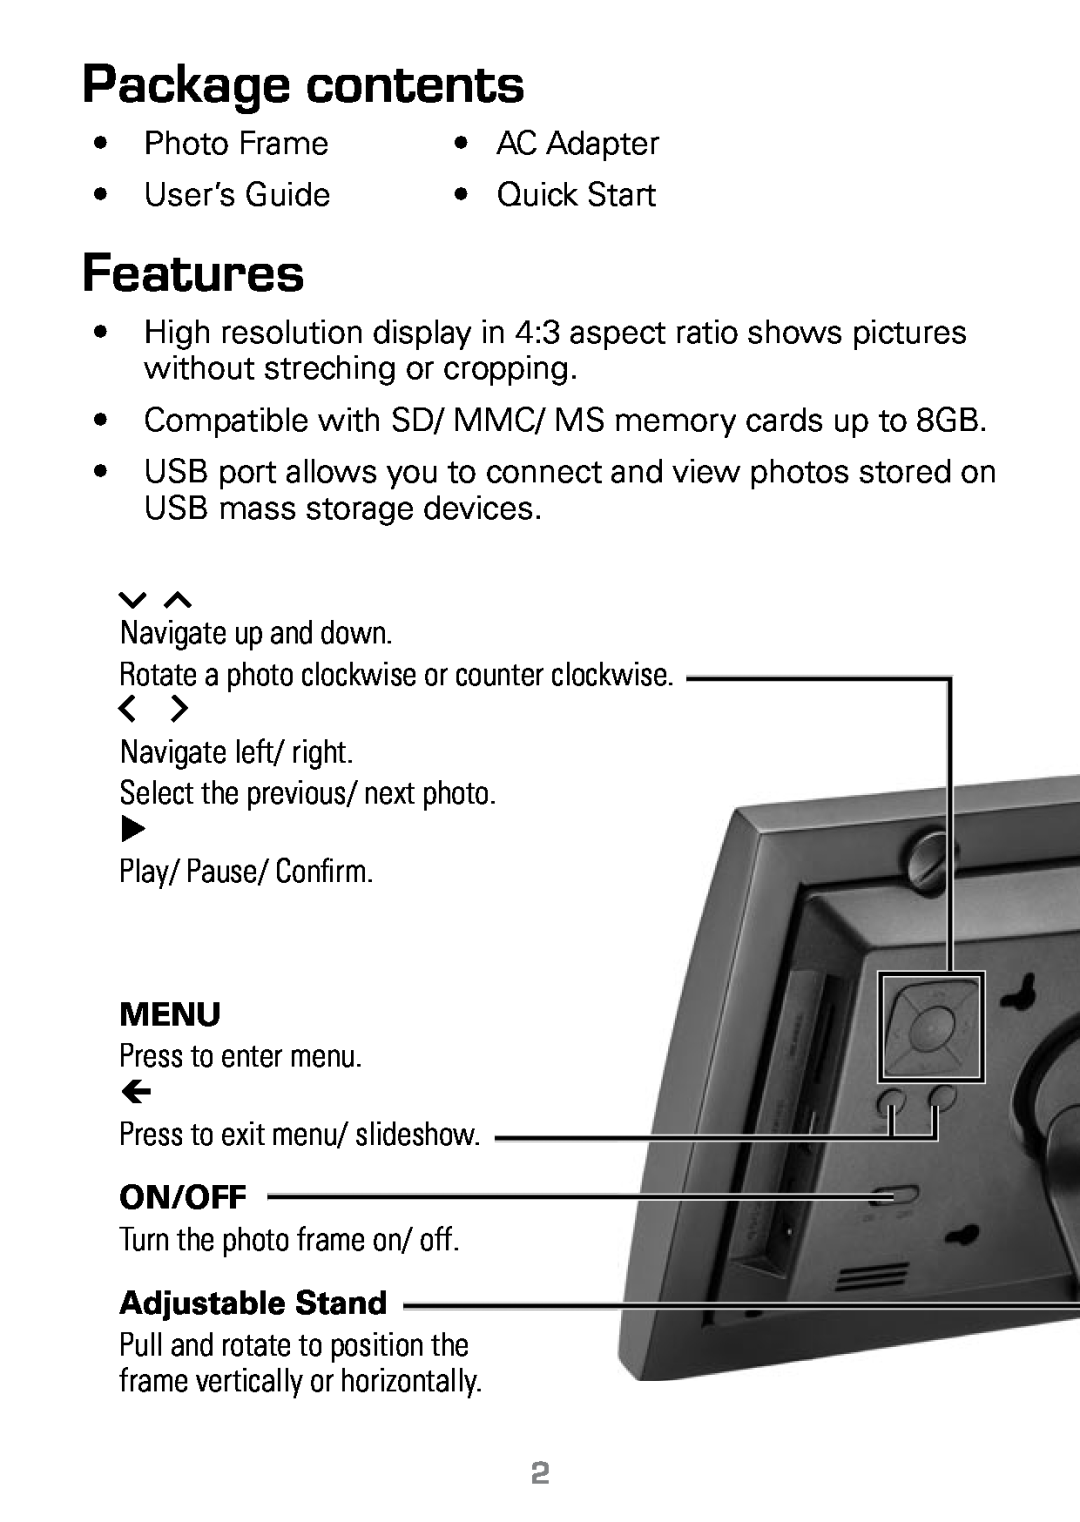 Radio Shack 16-1003 manual Package contents, Features, Menu, On/Off, Adjustable Stand 